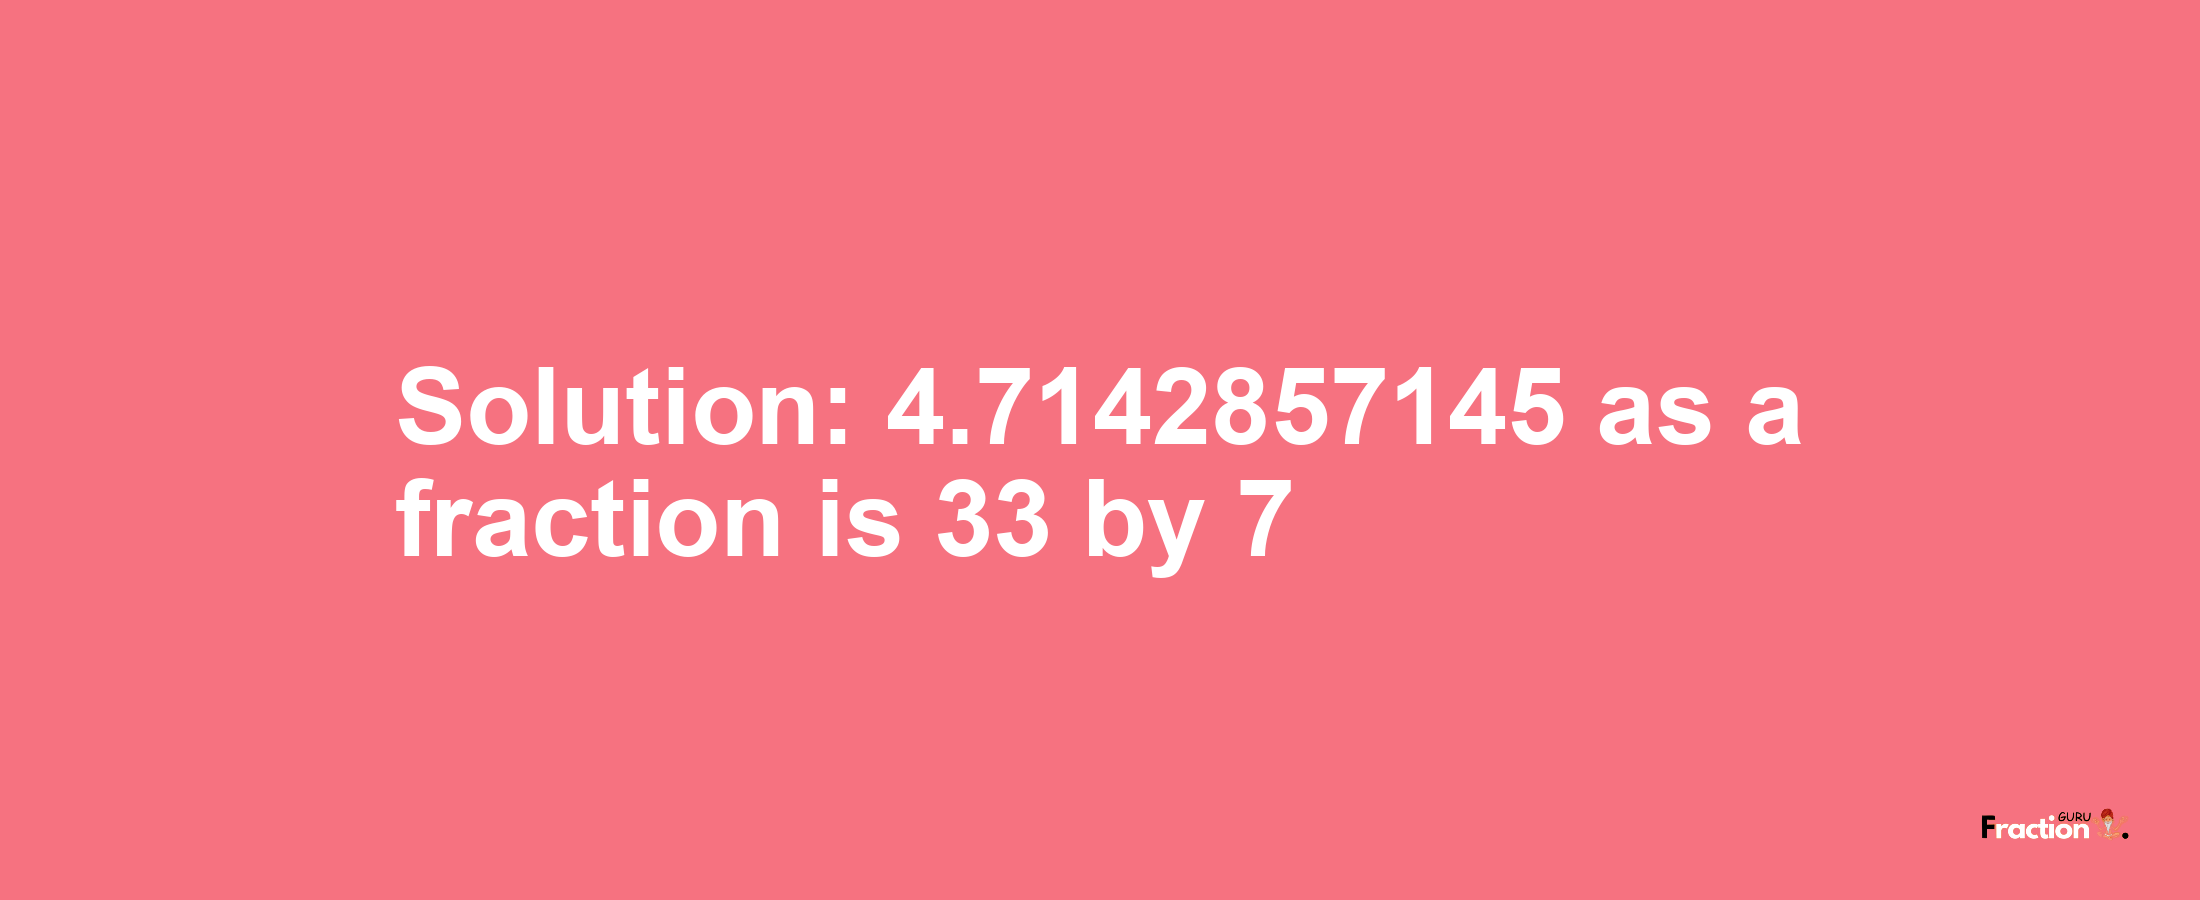 Solution:4.7142857145 as a fraction is 33/7